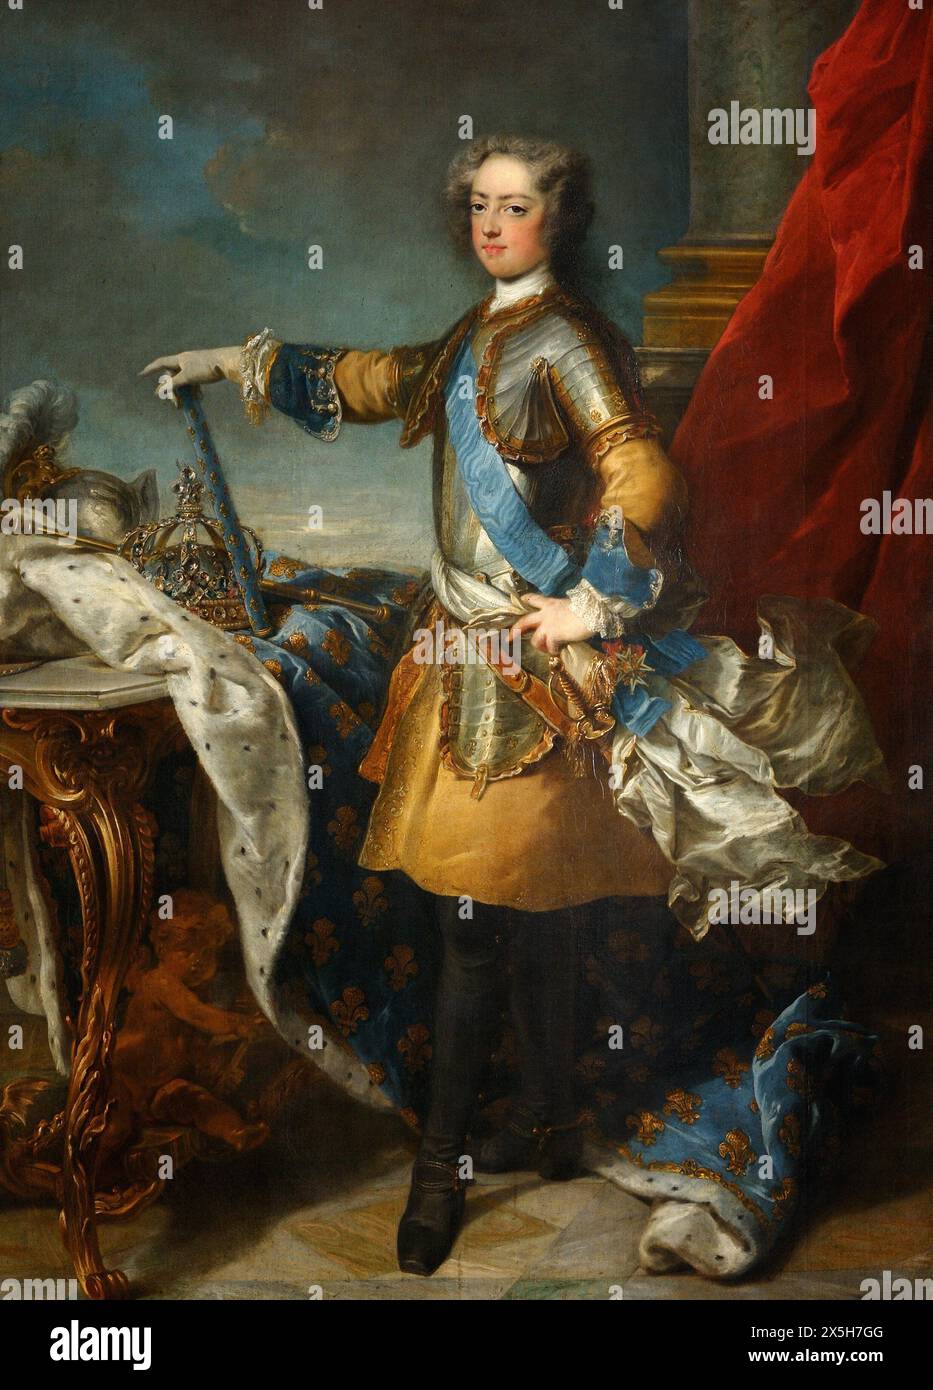 Louis XV, King of France and Navarre, c. 1723 (Palace of Versailles). Jean-Baptiste van Loo Stock Photo